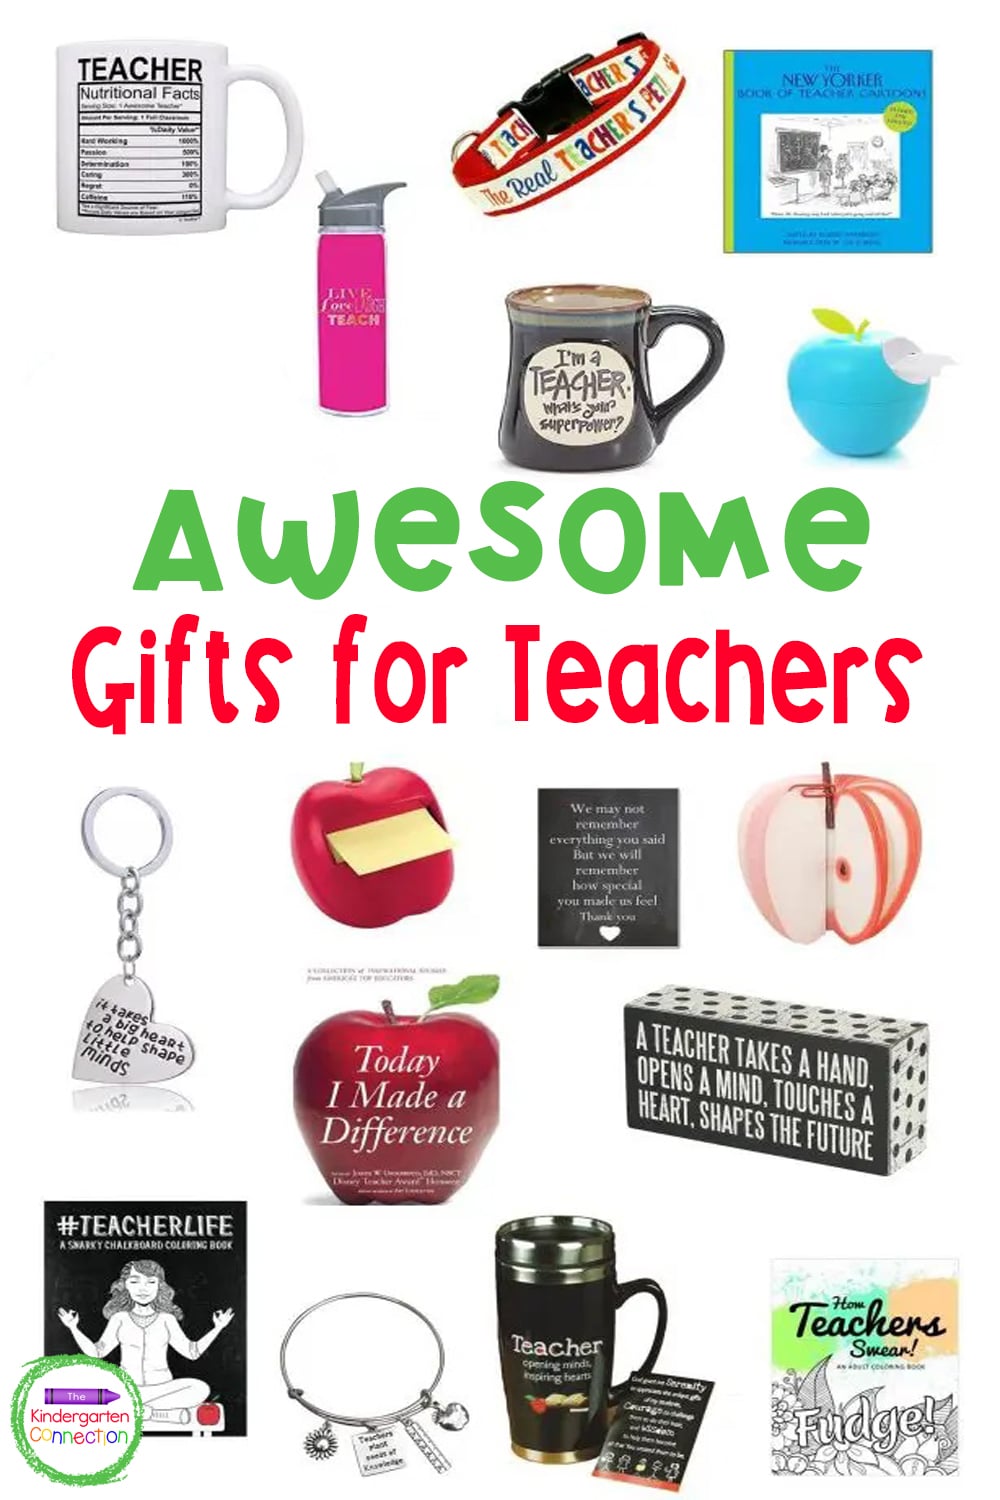 These awesome gifts for teachers may spark some ideas for you if you are looking for a way to make your child's teacher feel special!